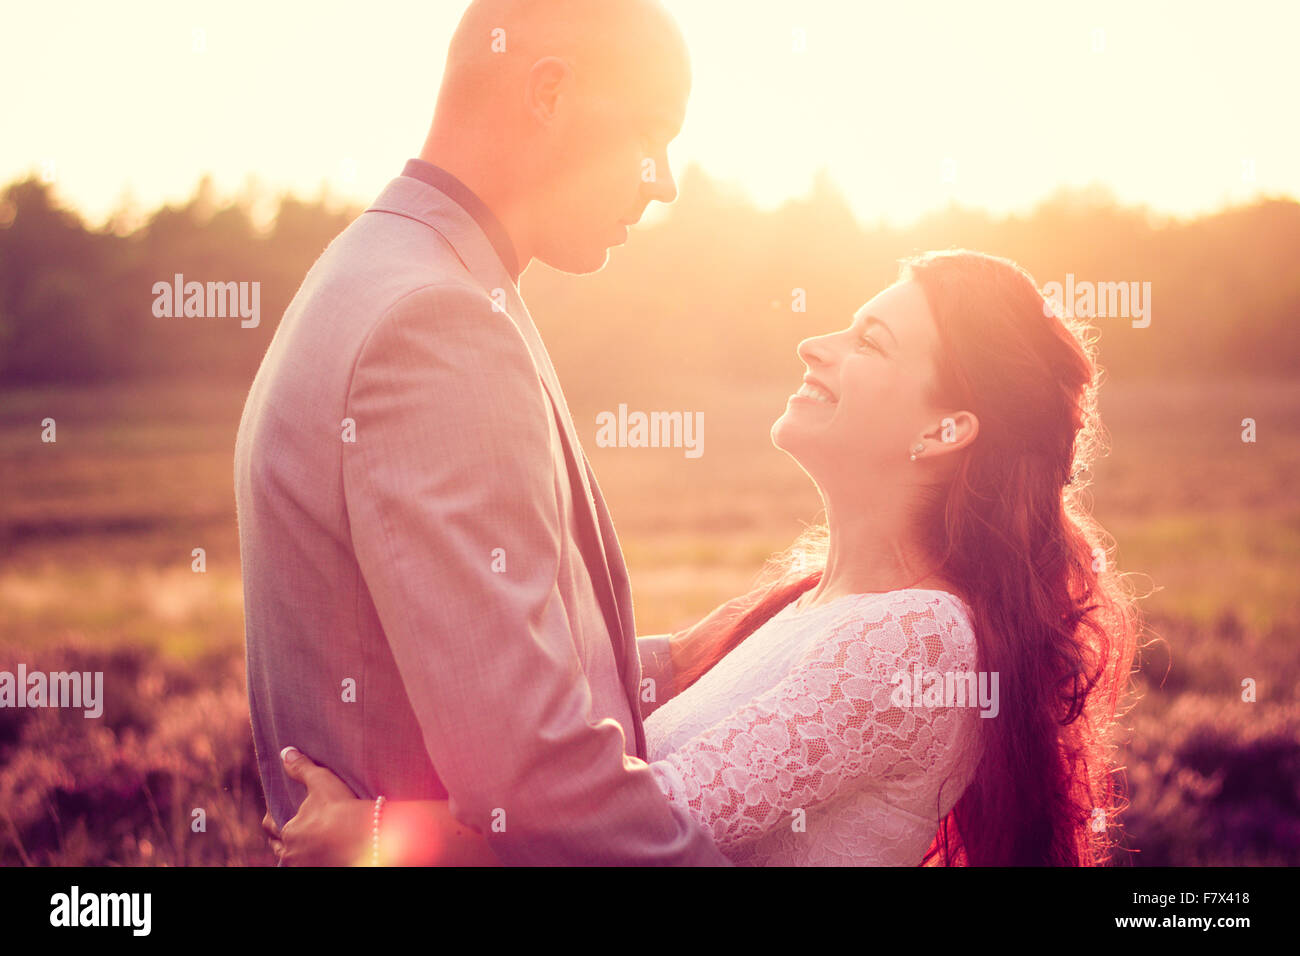 Smiling couple embracing outdoors at sunset Banque D'Images